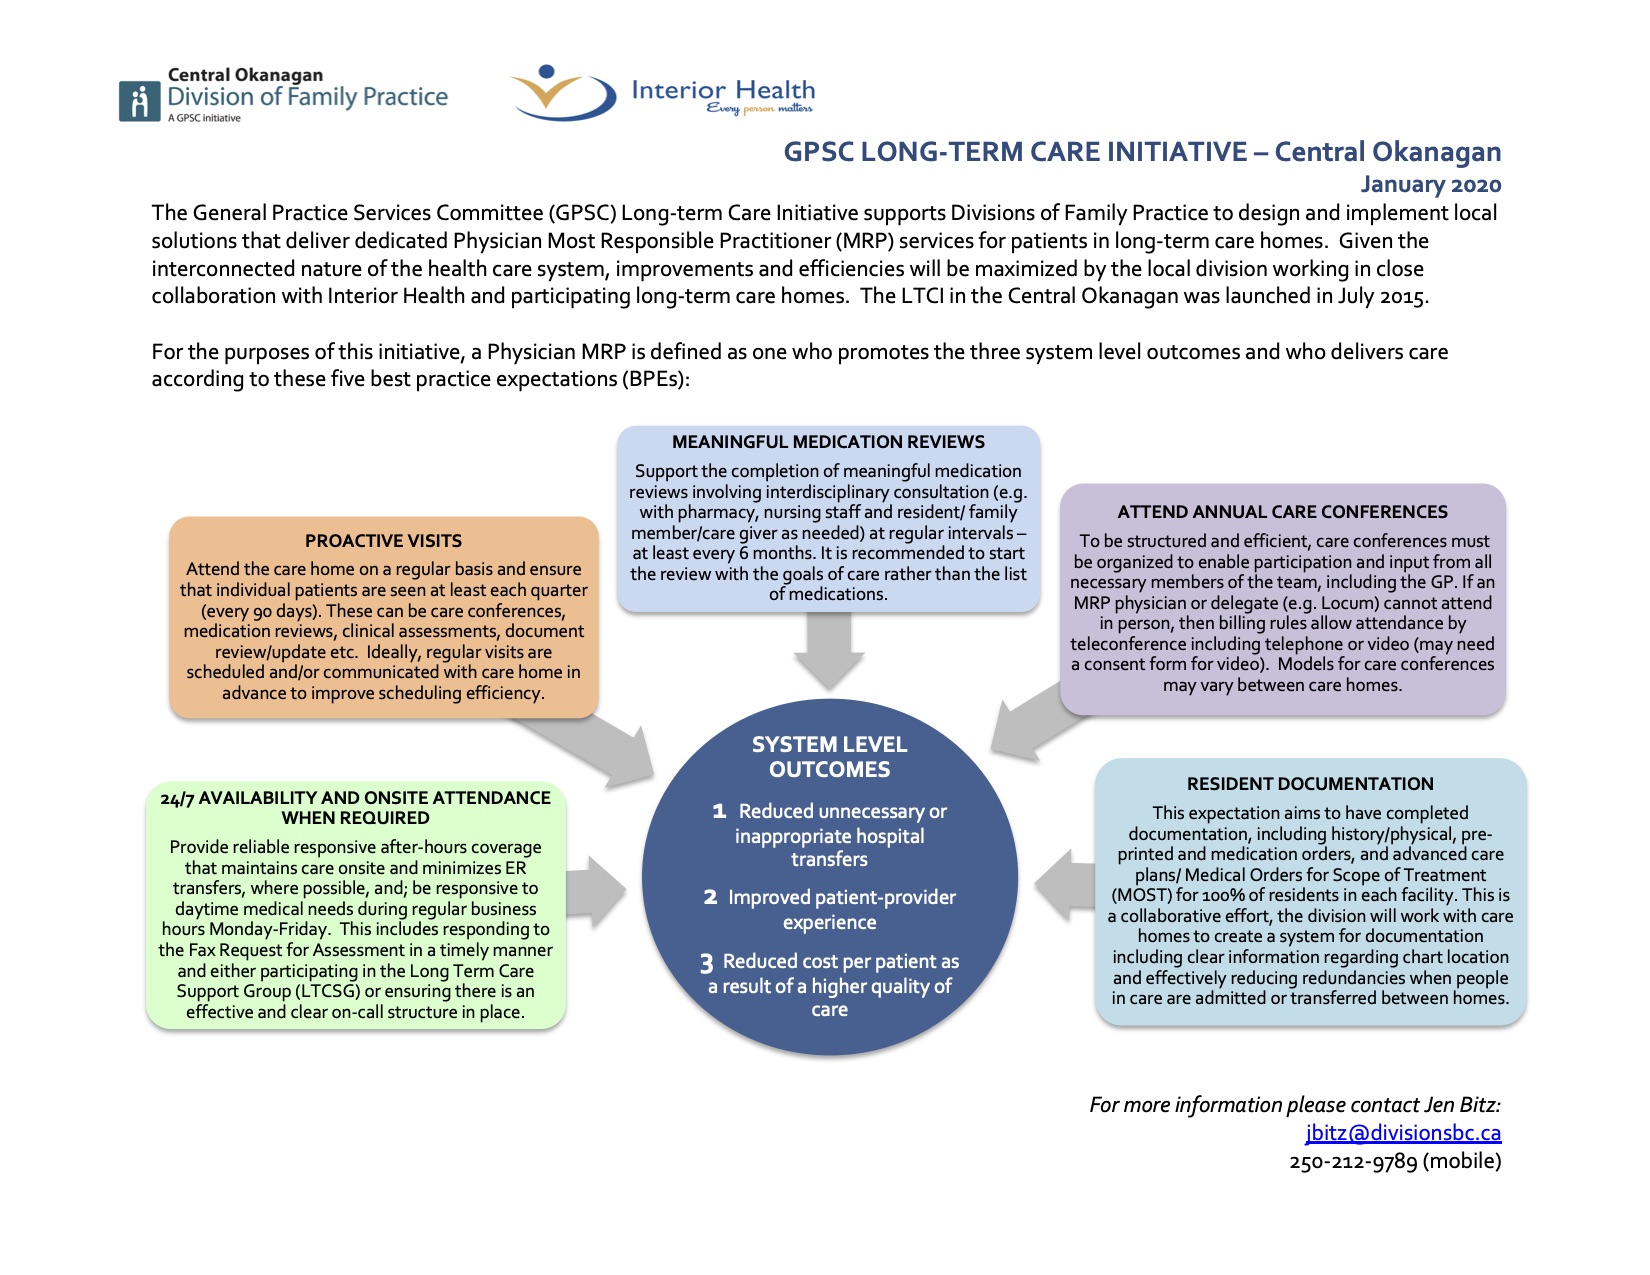 LTC Initiative Overview 2020 graphic.jpg